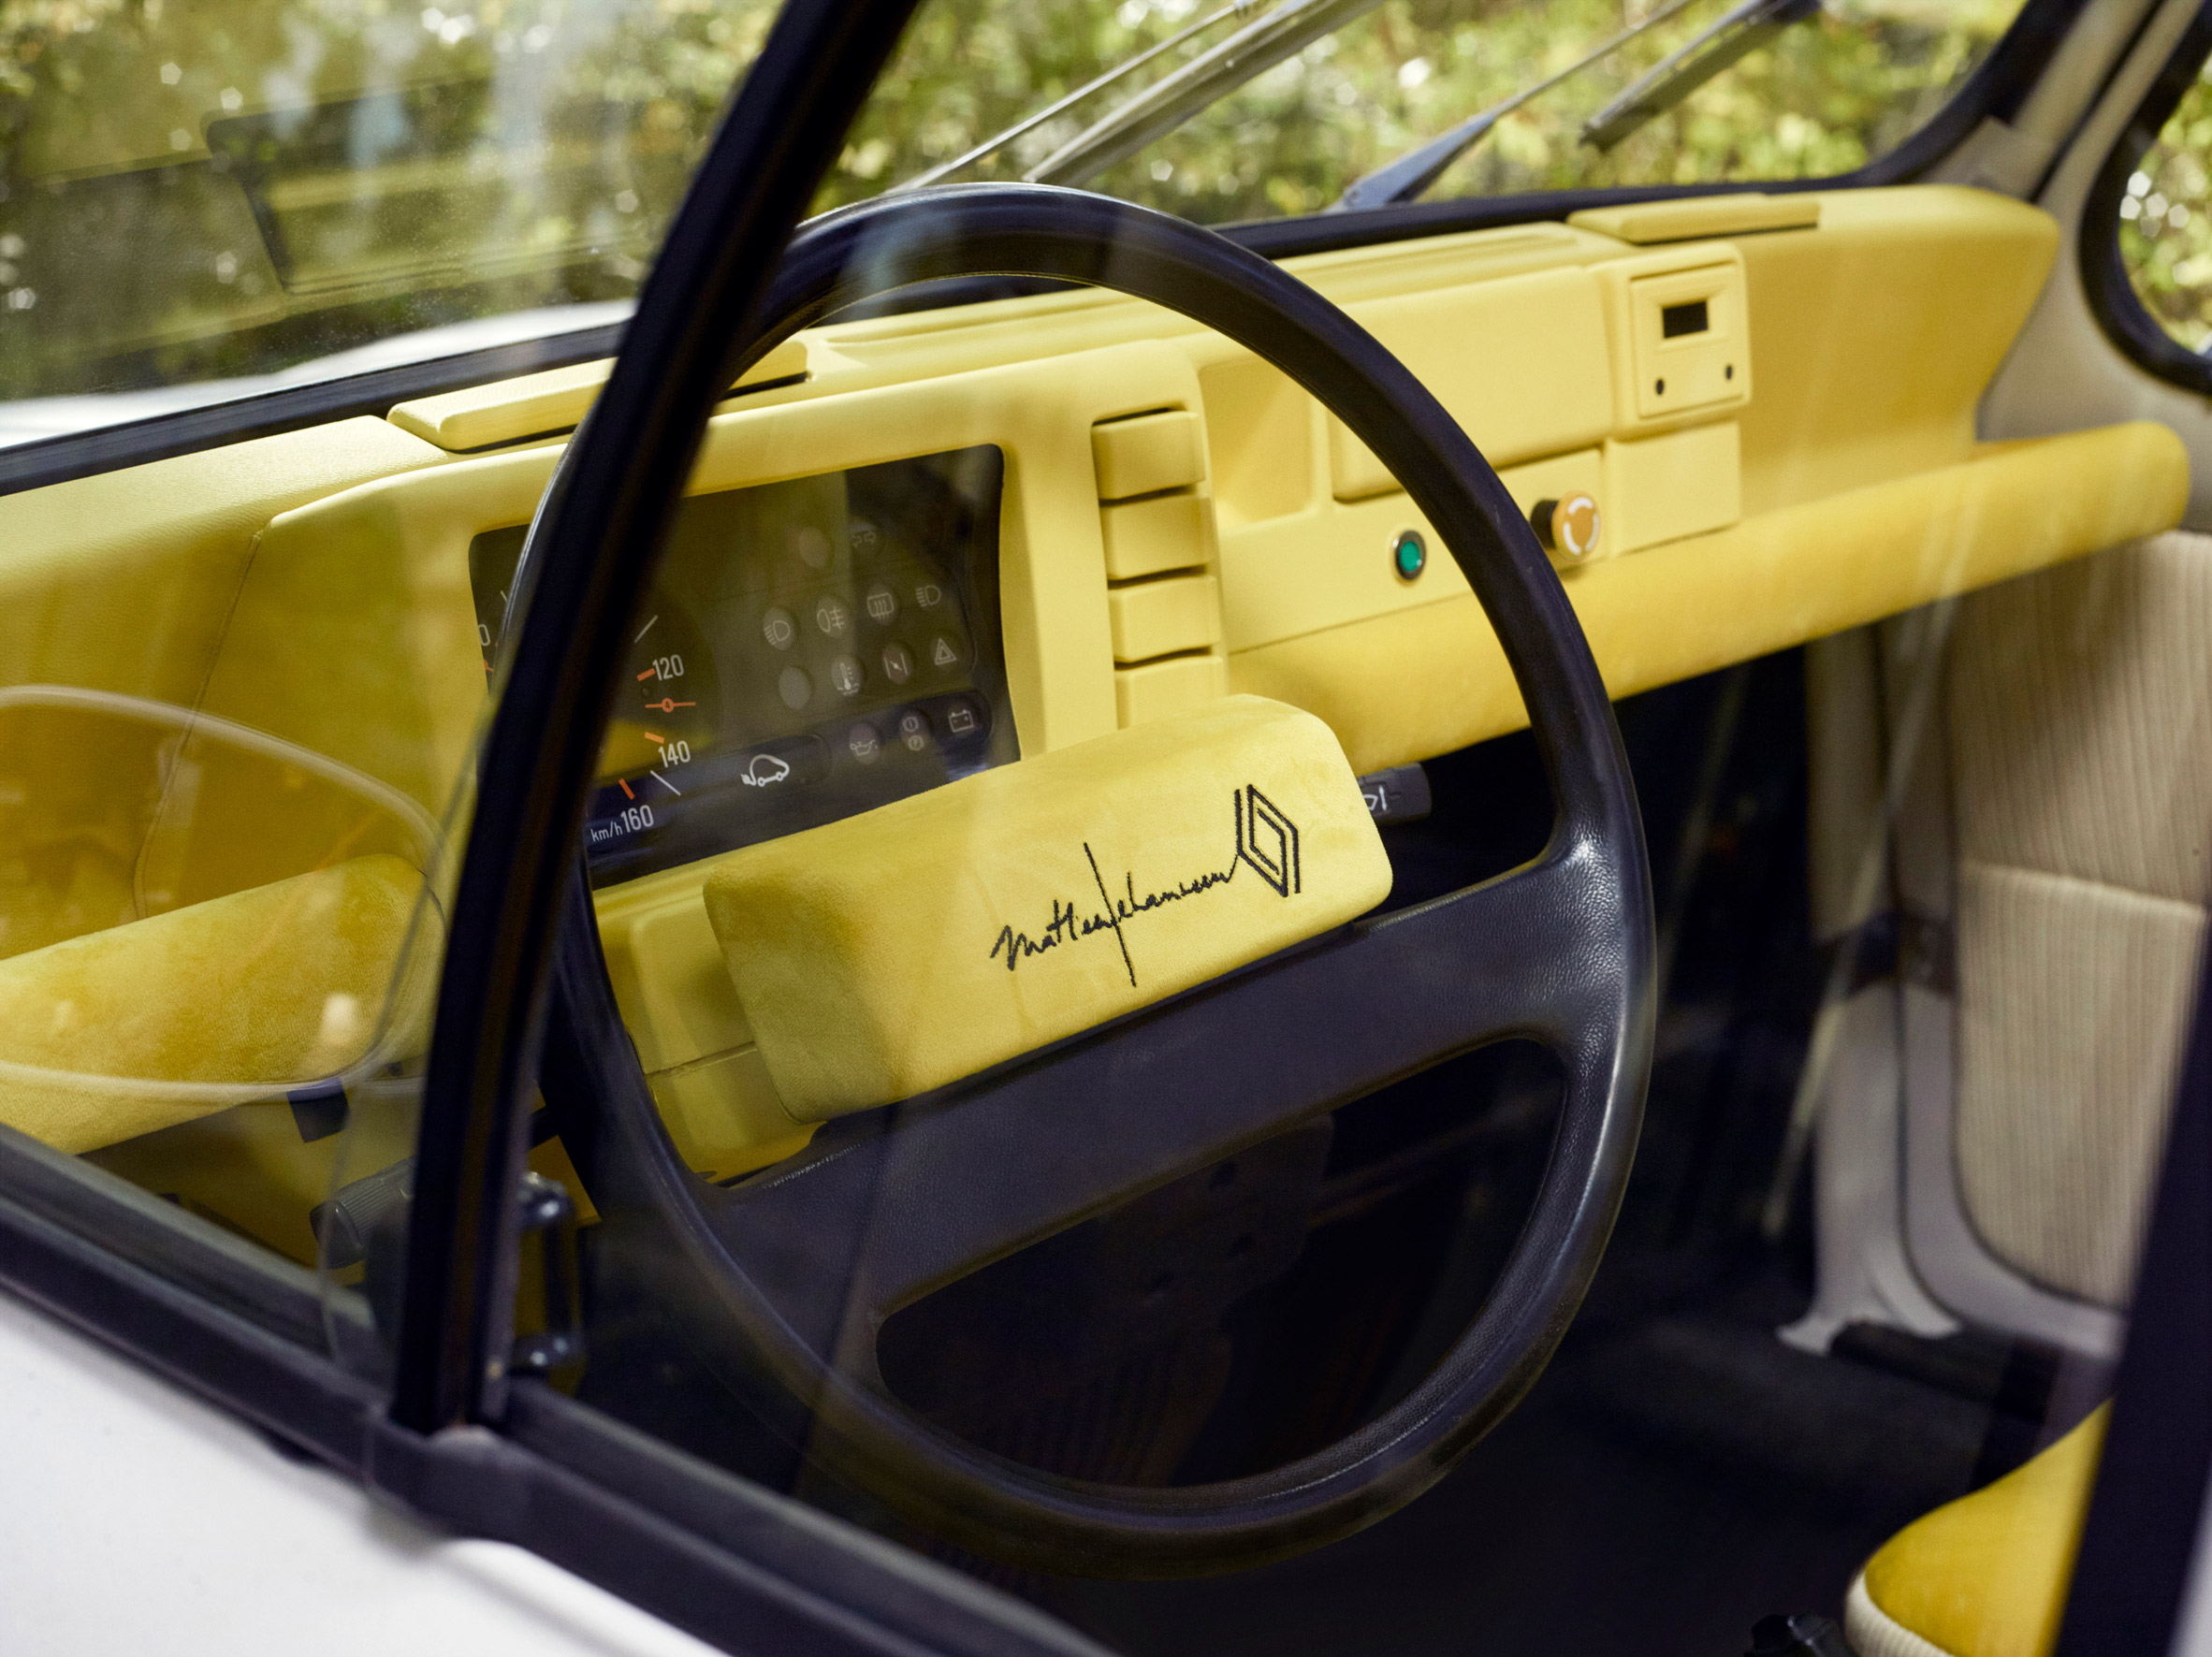  Yellow upholstered control panel in the Renault Suite No. 4